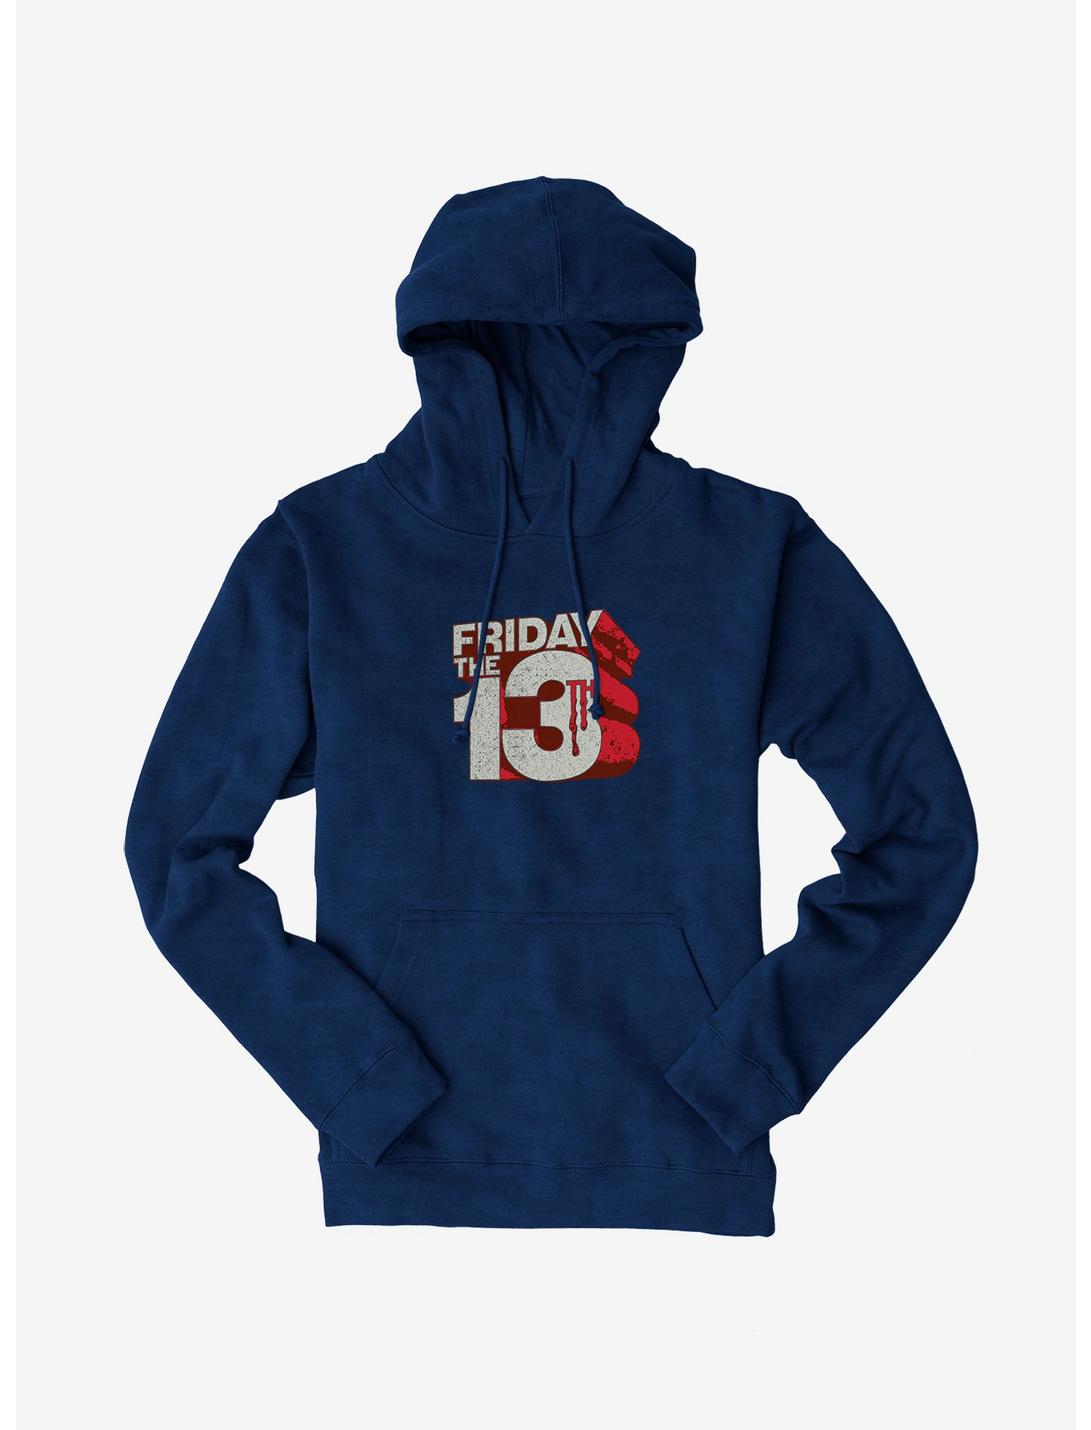 Friday The 13th Block Letters Hoodie, NAVY, hi-res